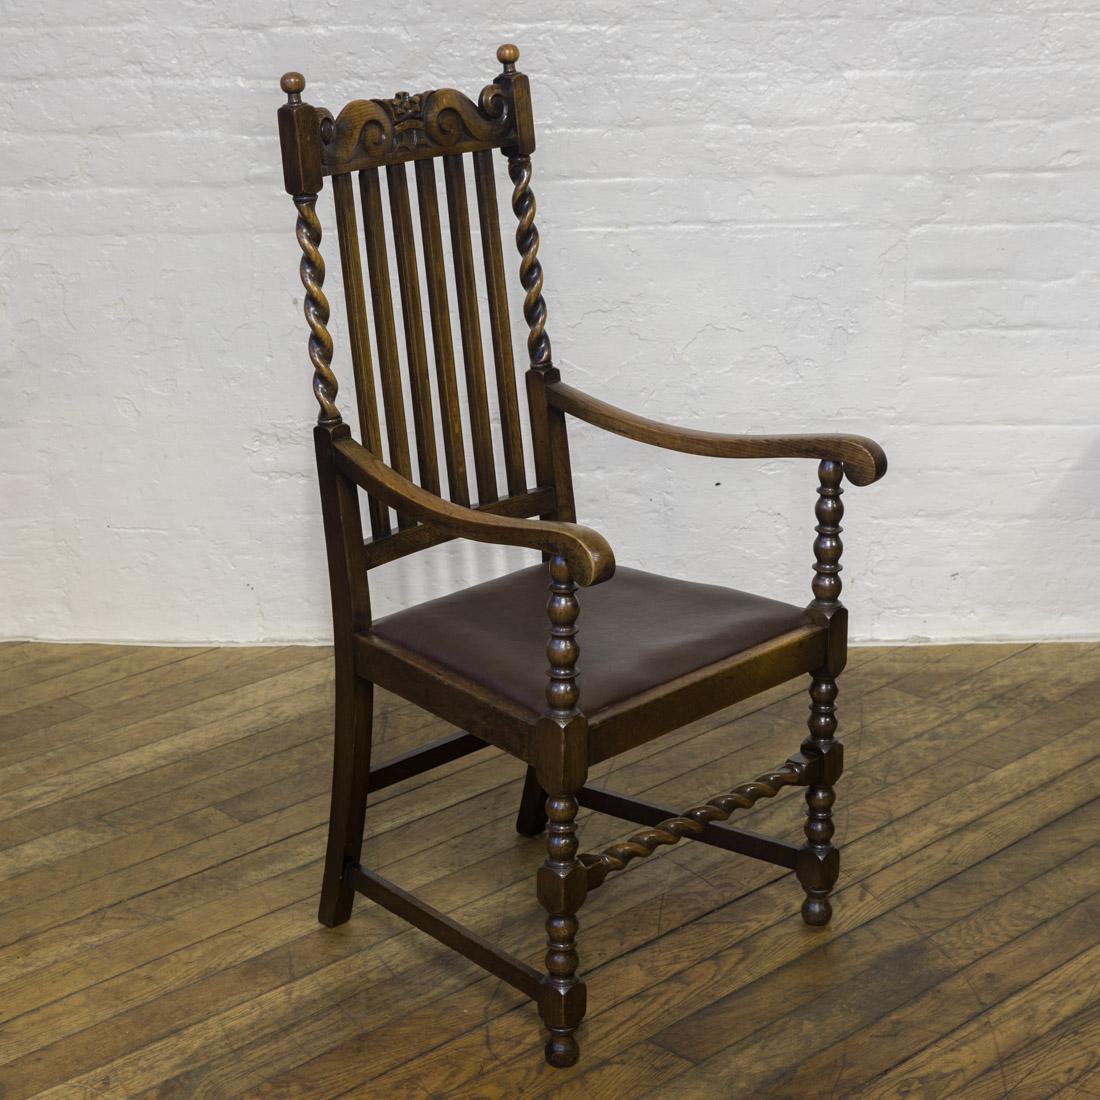 A wonderful set of six solid oak chairs with a strong Jacobean influence. The latted backs have barley twist uprights which compliment the front stretchers. Along with the crested top rail these make for a very attractive set of six chairs (two